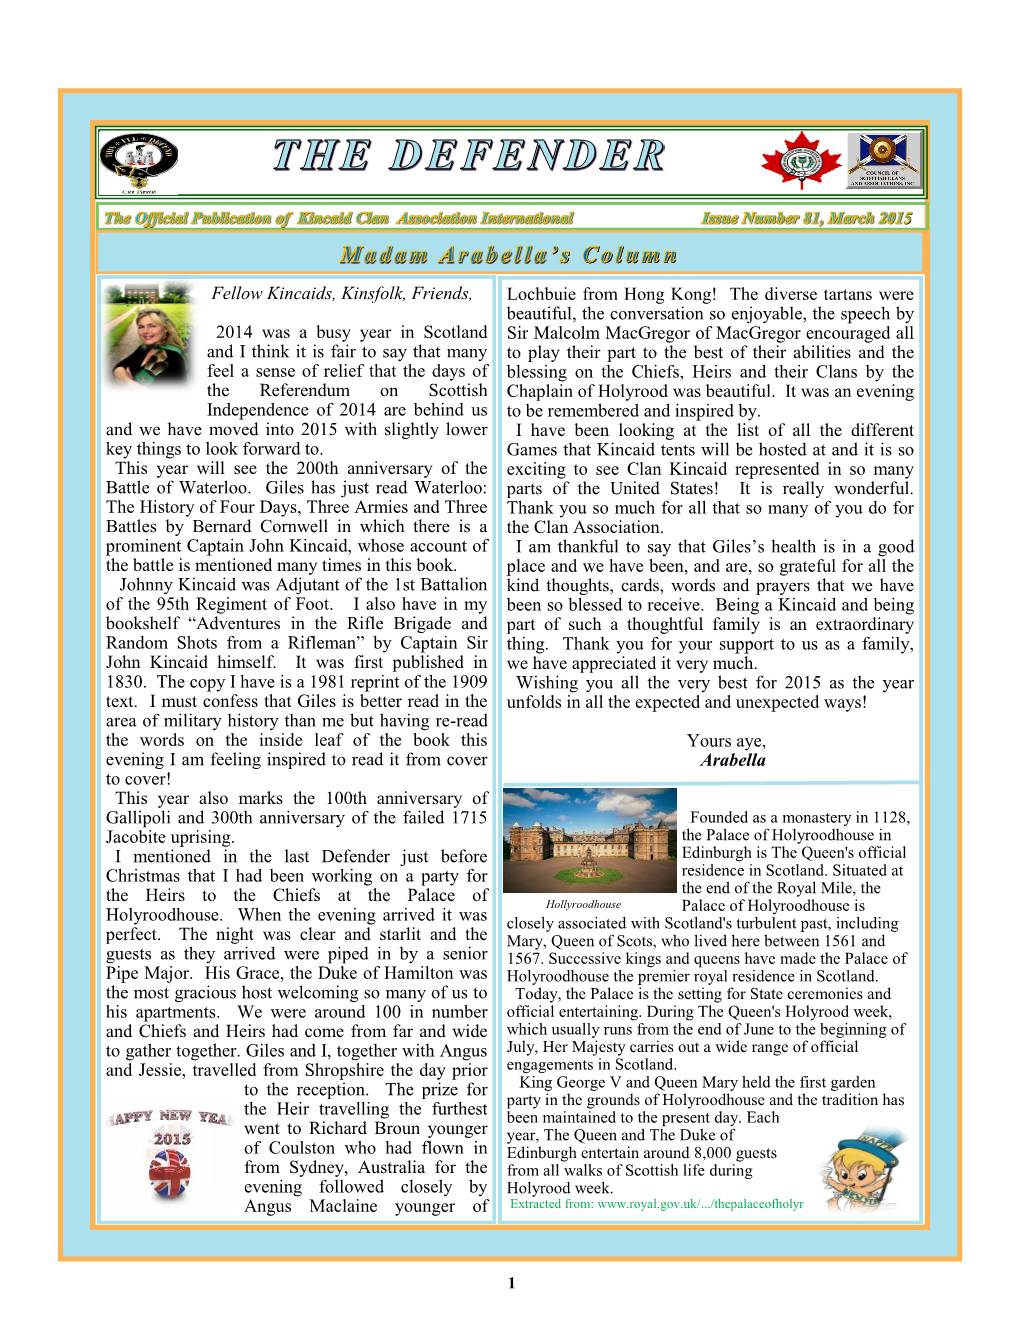 The Defender, Issue 81